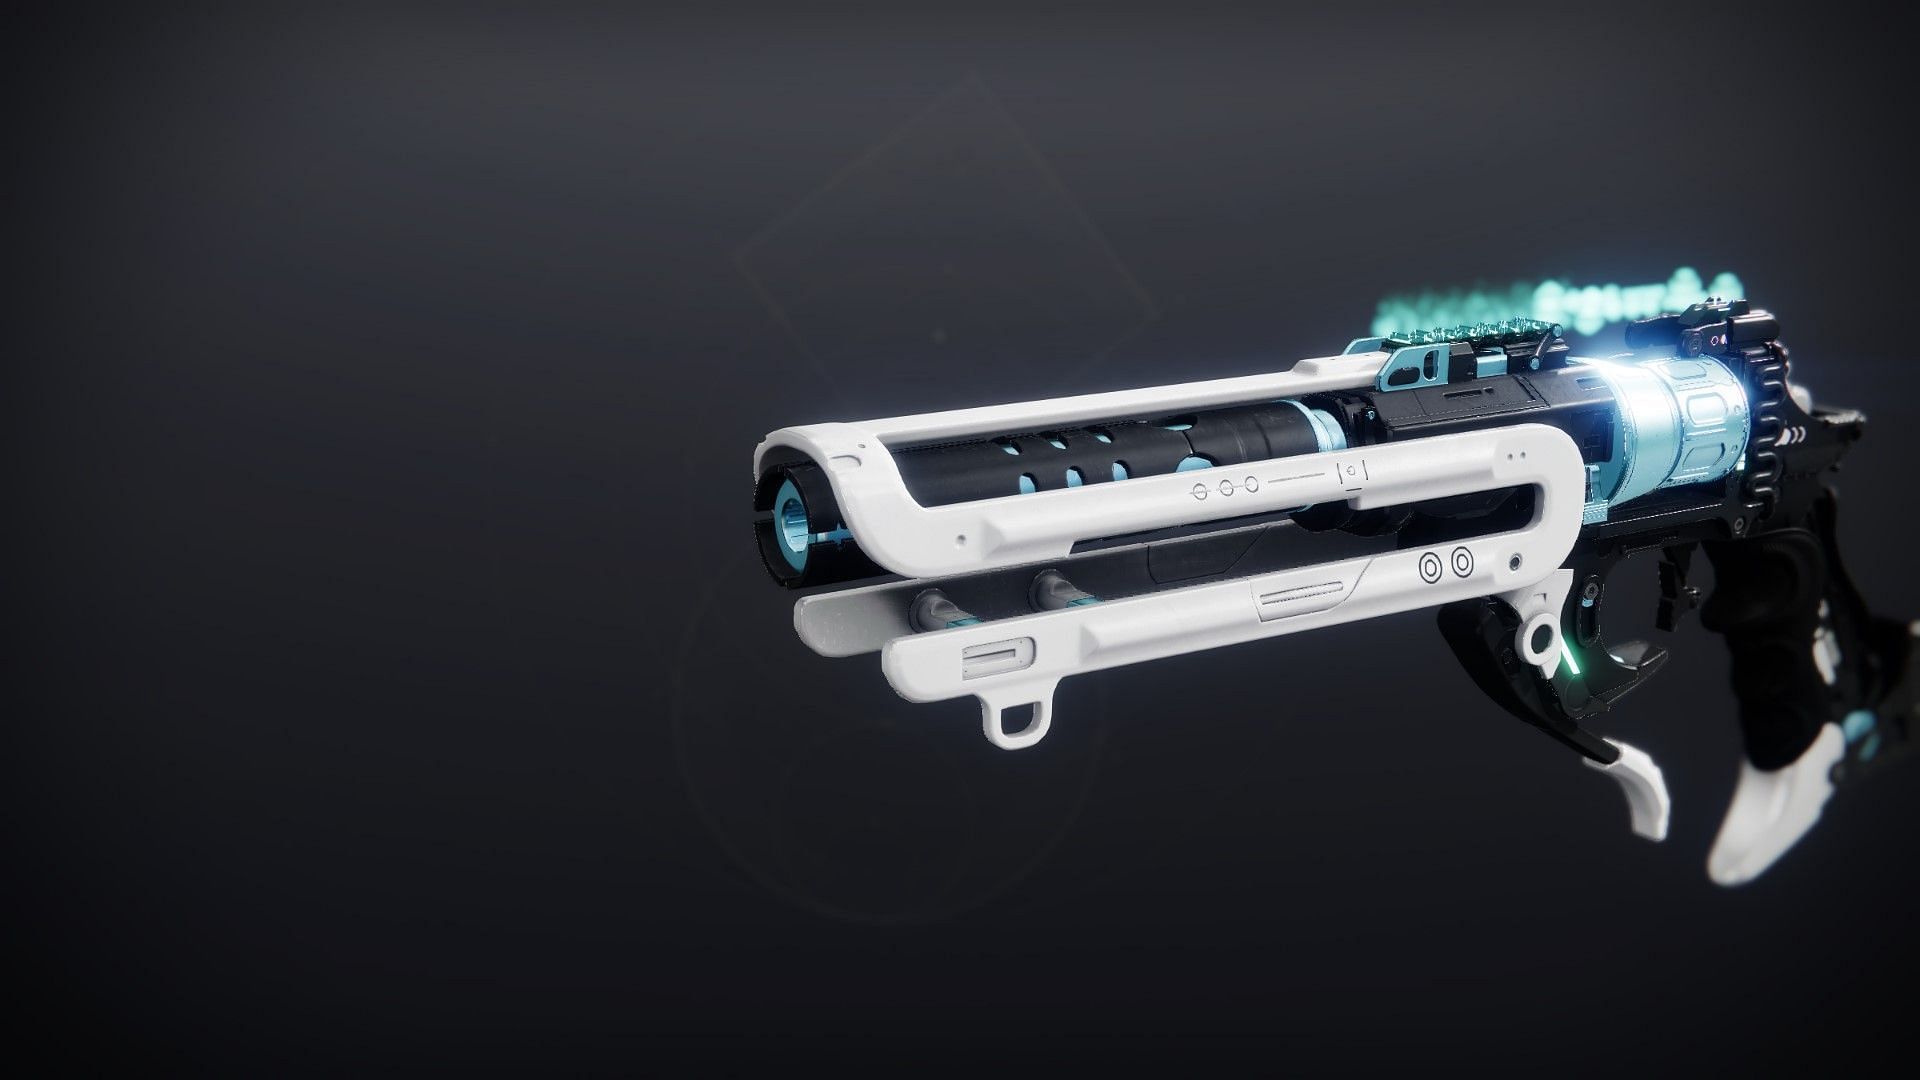 The Posterity is an excellent Hand Cannon players can obtain and upgrade in Destiny 2 (image via Light.gg)